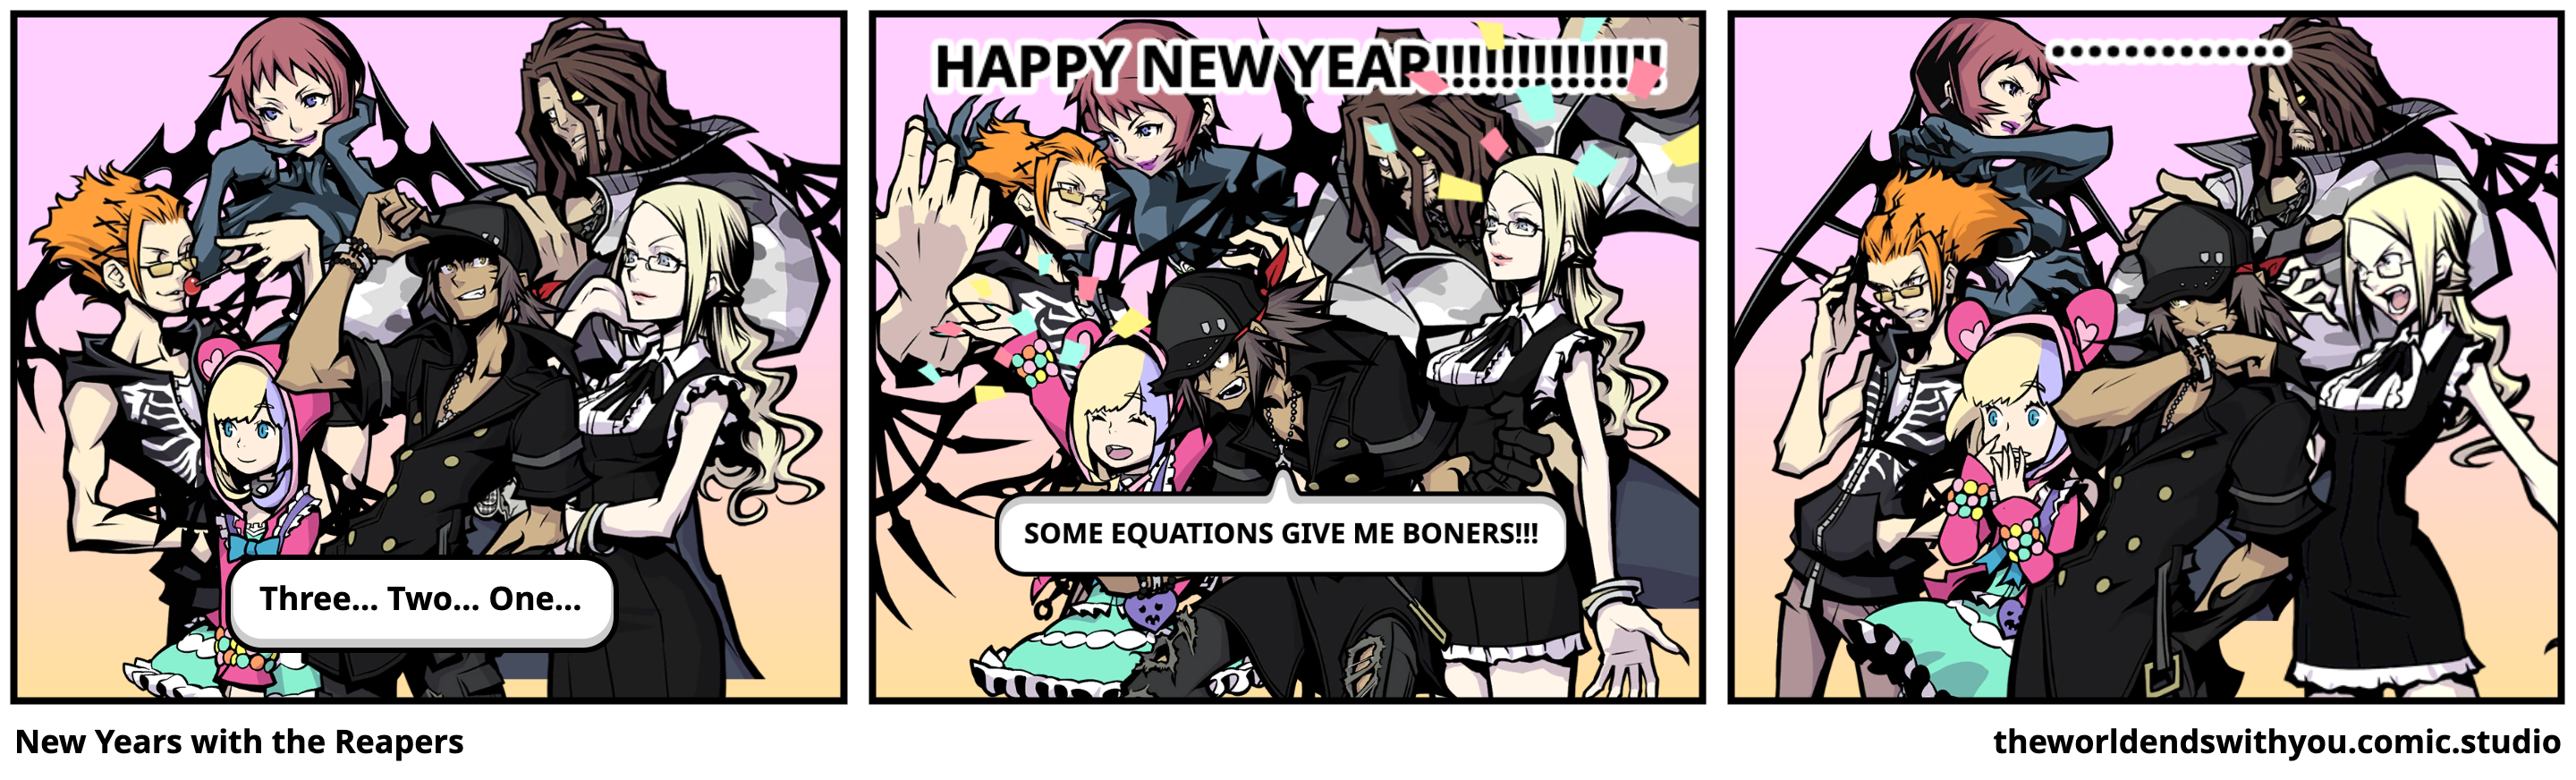 New Years with the Reapers